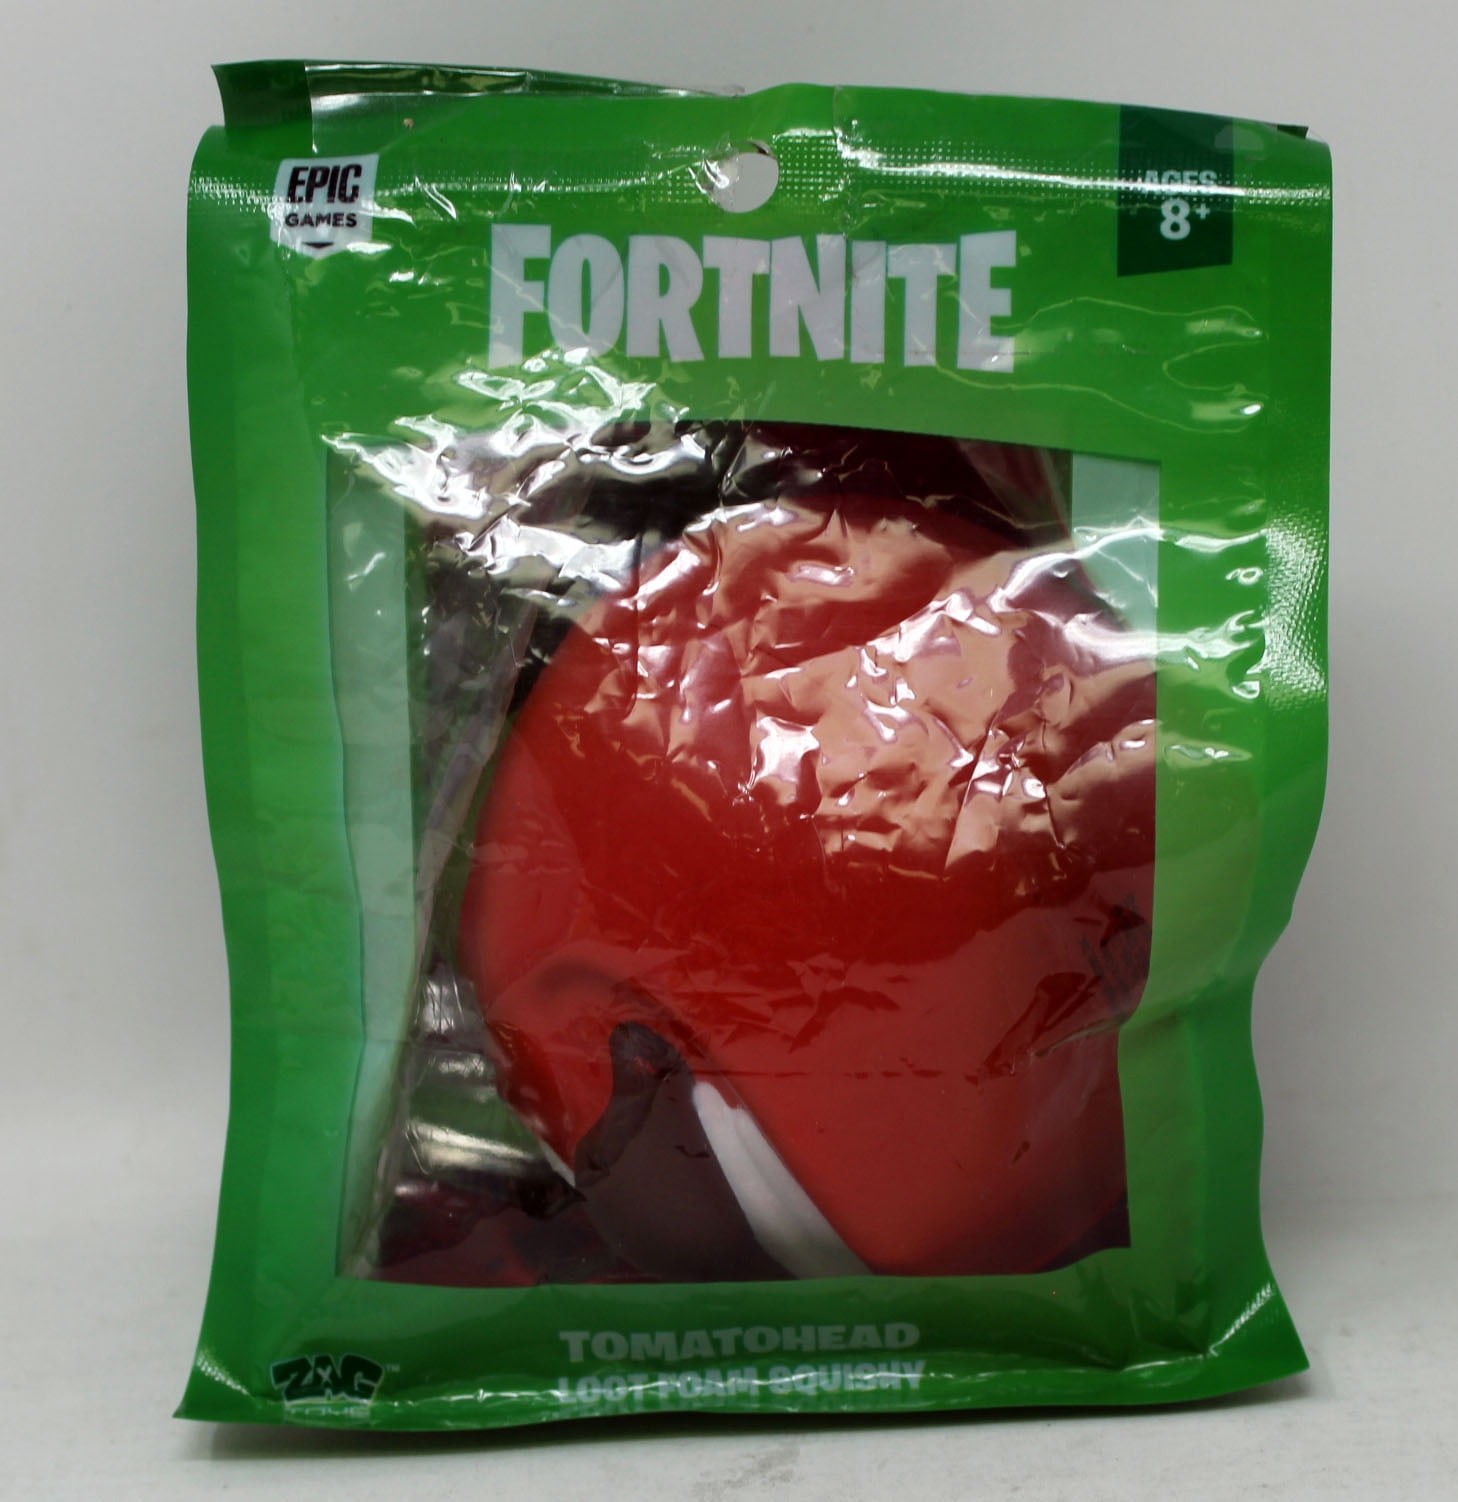 Fortnite Tomatohead Loot Foam Squishy 5" Epic Games Zag Toys for sale online 